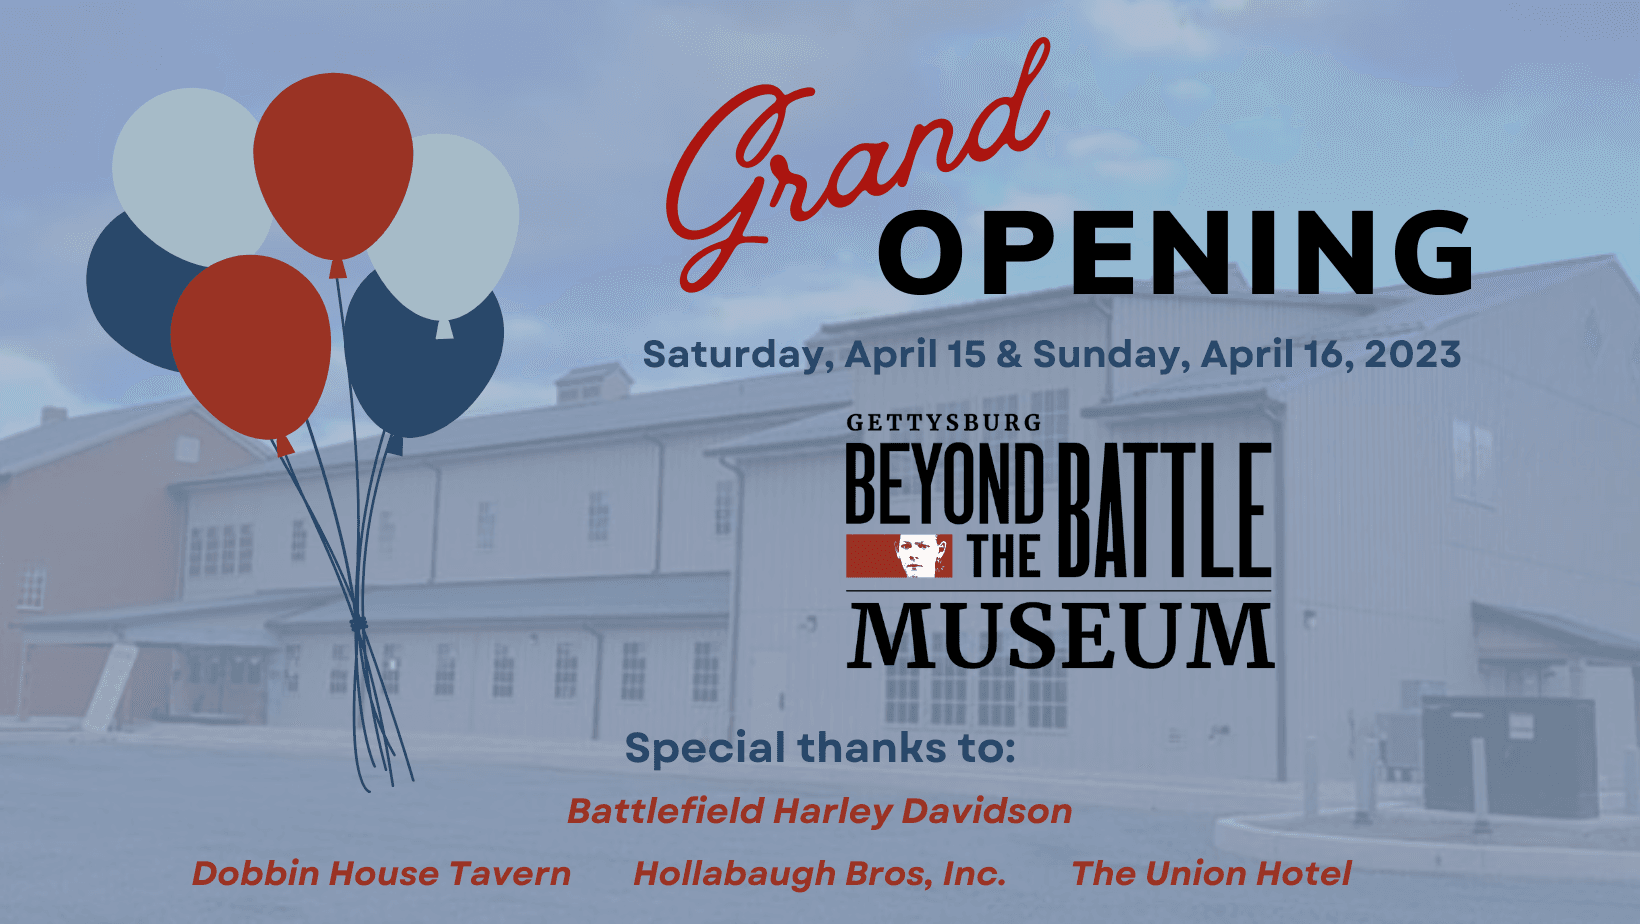 Grand Opening Announcement Card